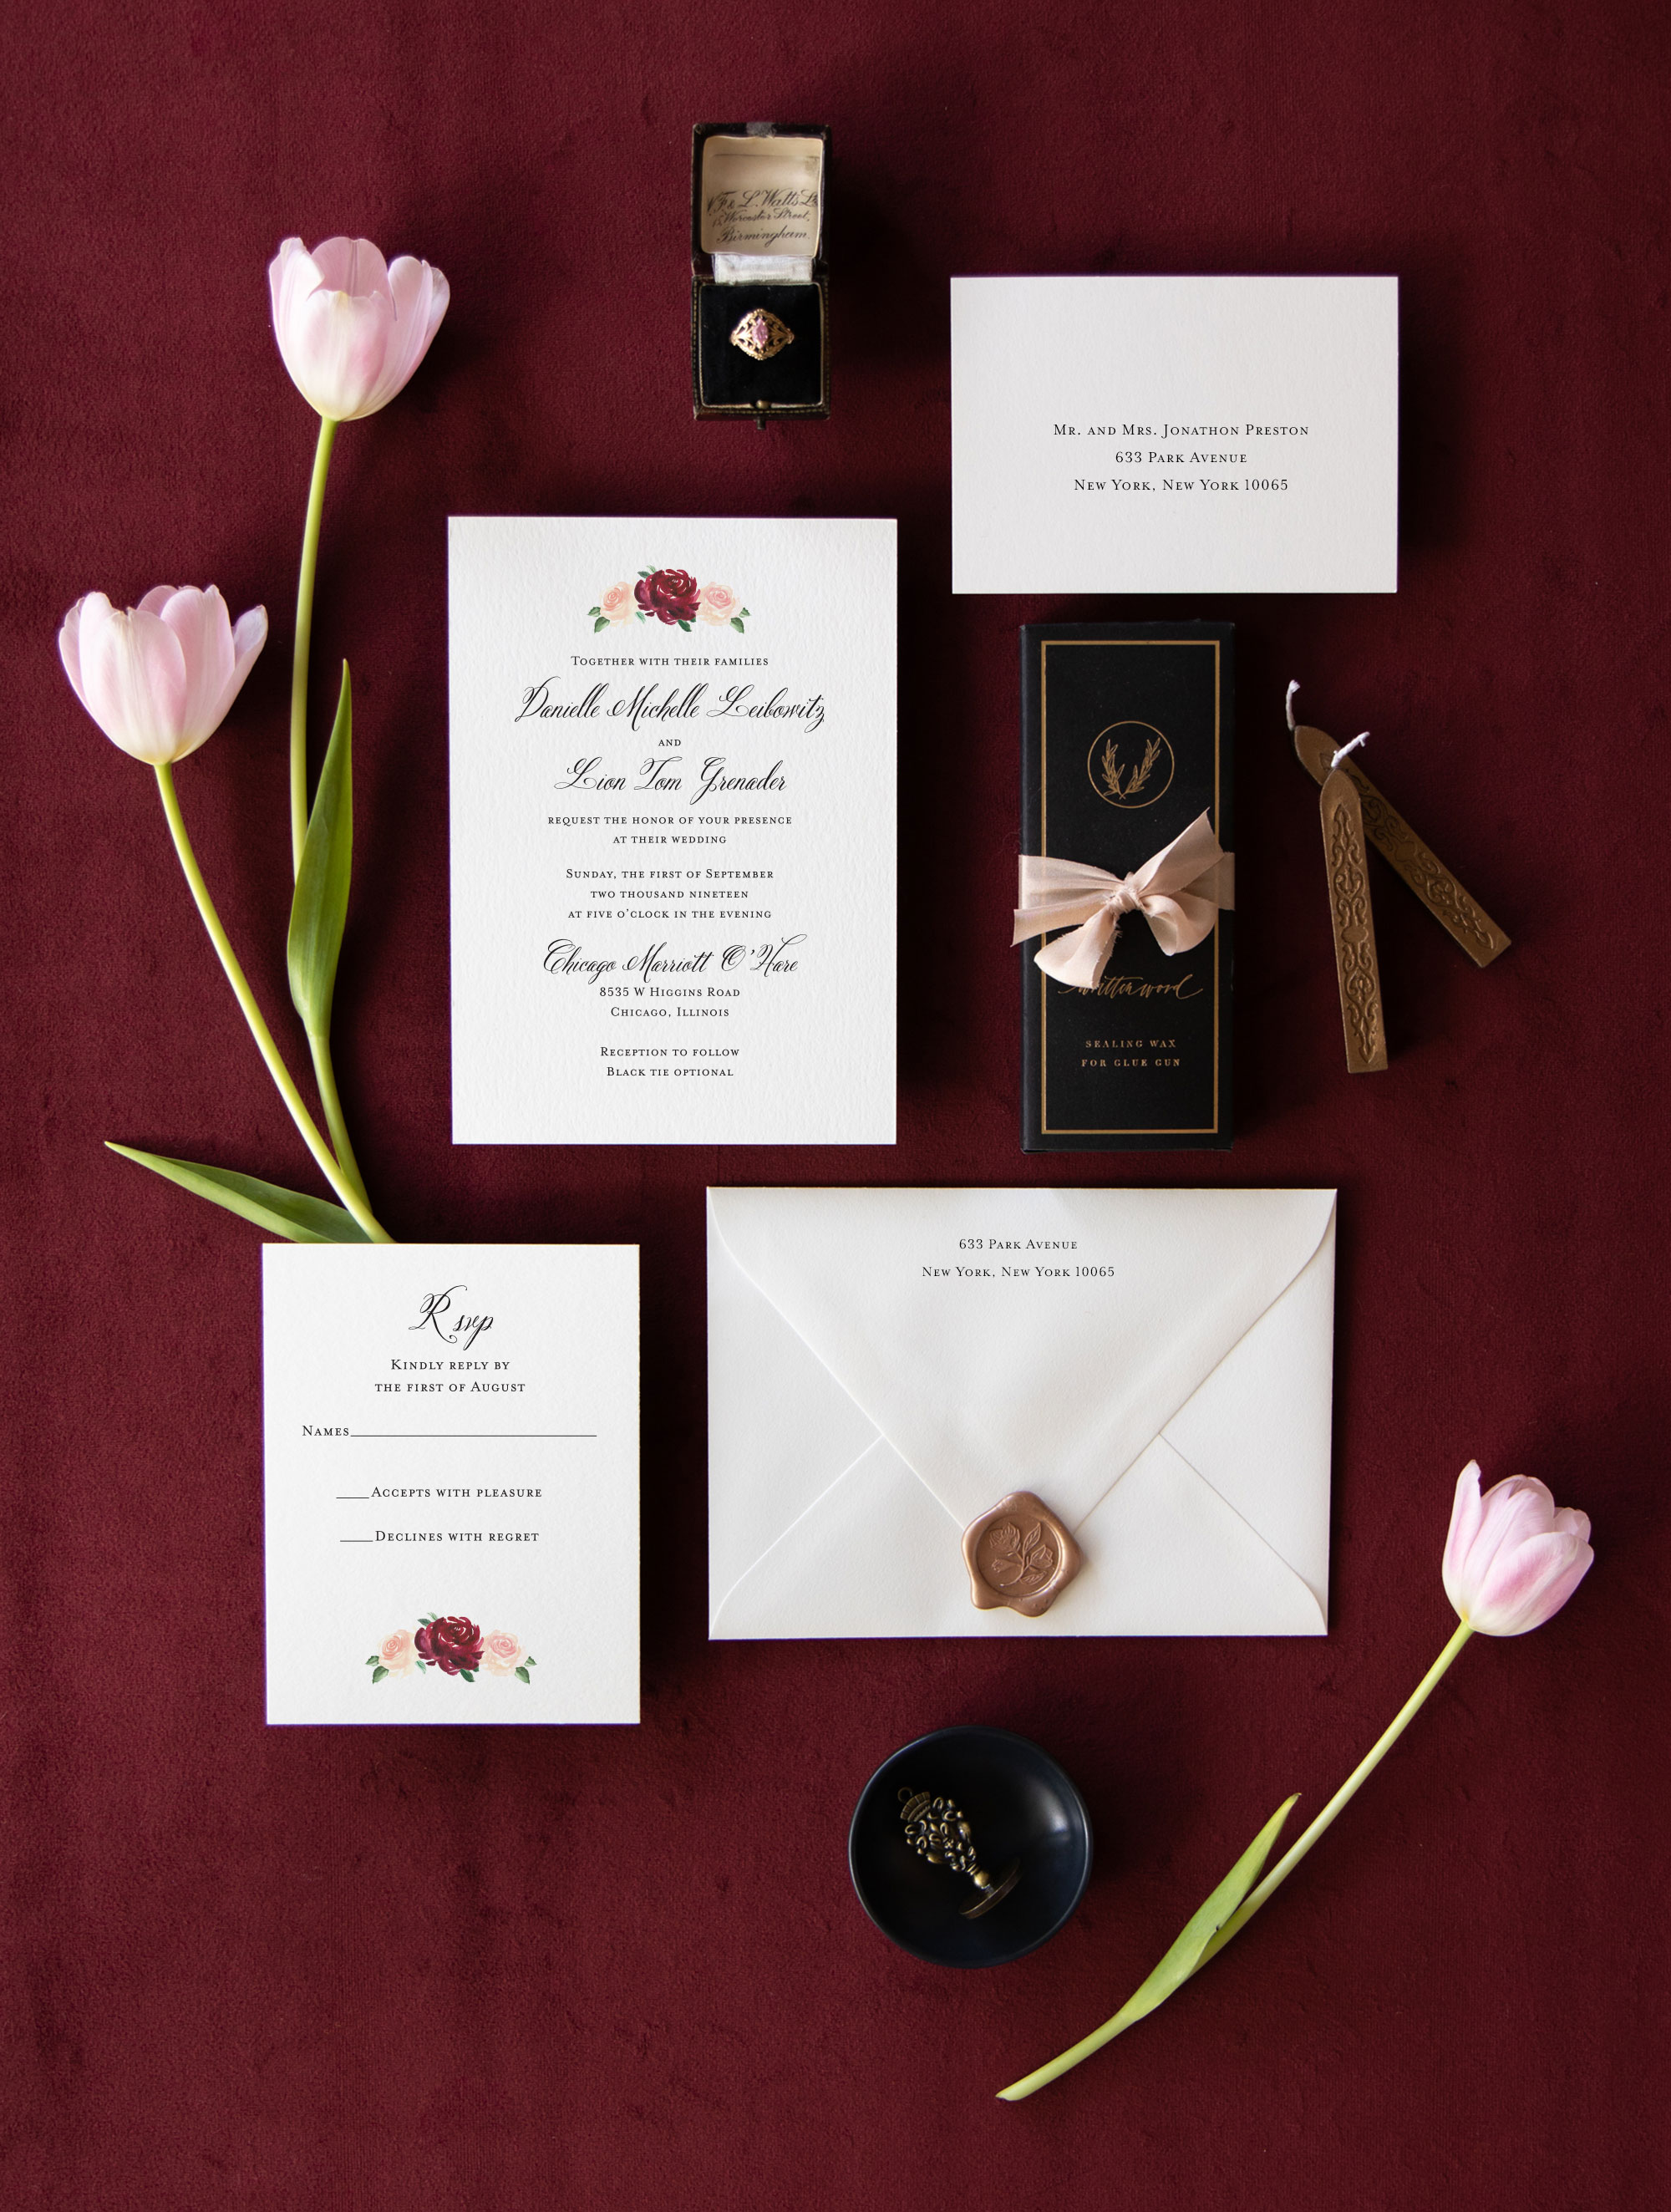 cheapest-way-to-print-wedding-invitations-red-wedding-invitations